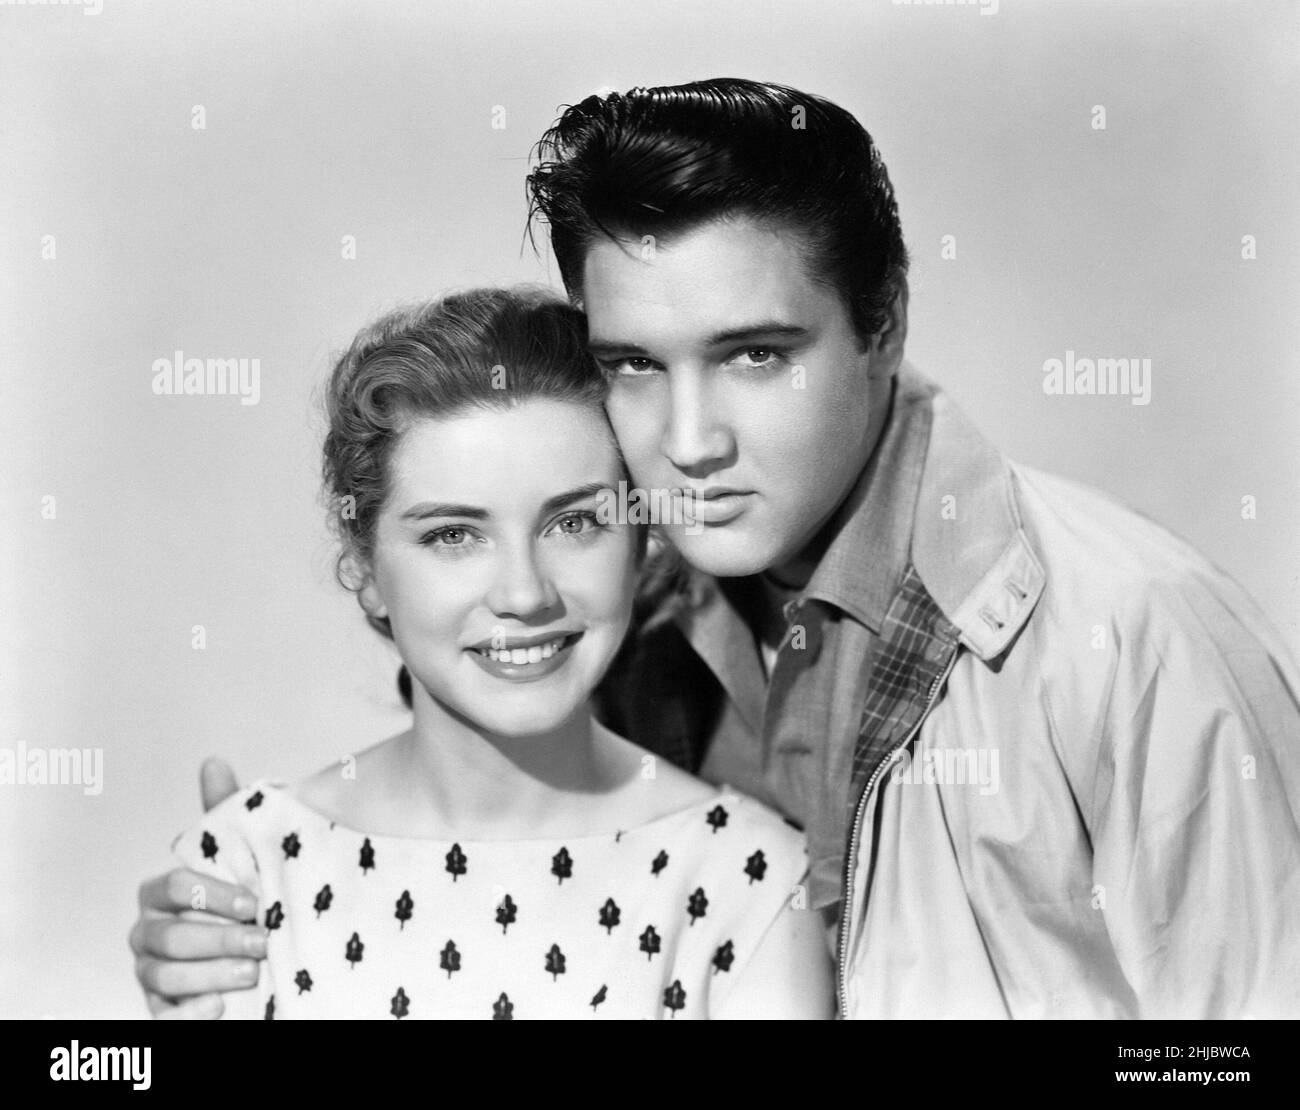 King Créole  A Hal Wallis Production  A Paramount Picture Director: Michael Curtiz Elvis Presley, Dolores Hart  Copyright 1958 by Hal B. Wallis and Joseph H. Hazen.  Permission granted for newspaper and magazine reproduction (MAde In U.S.A.) Stock Photo